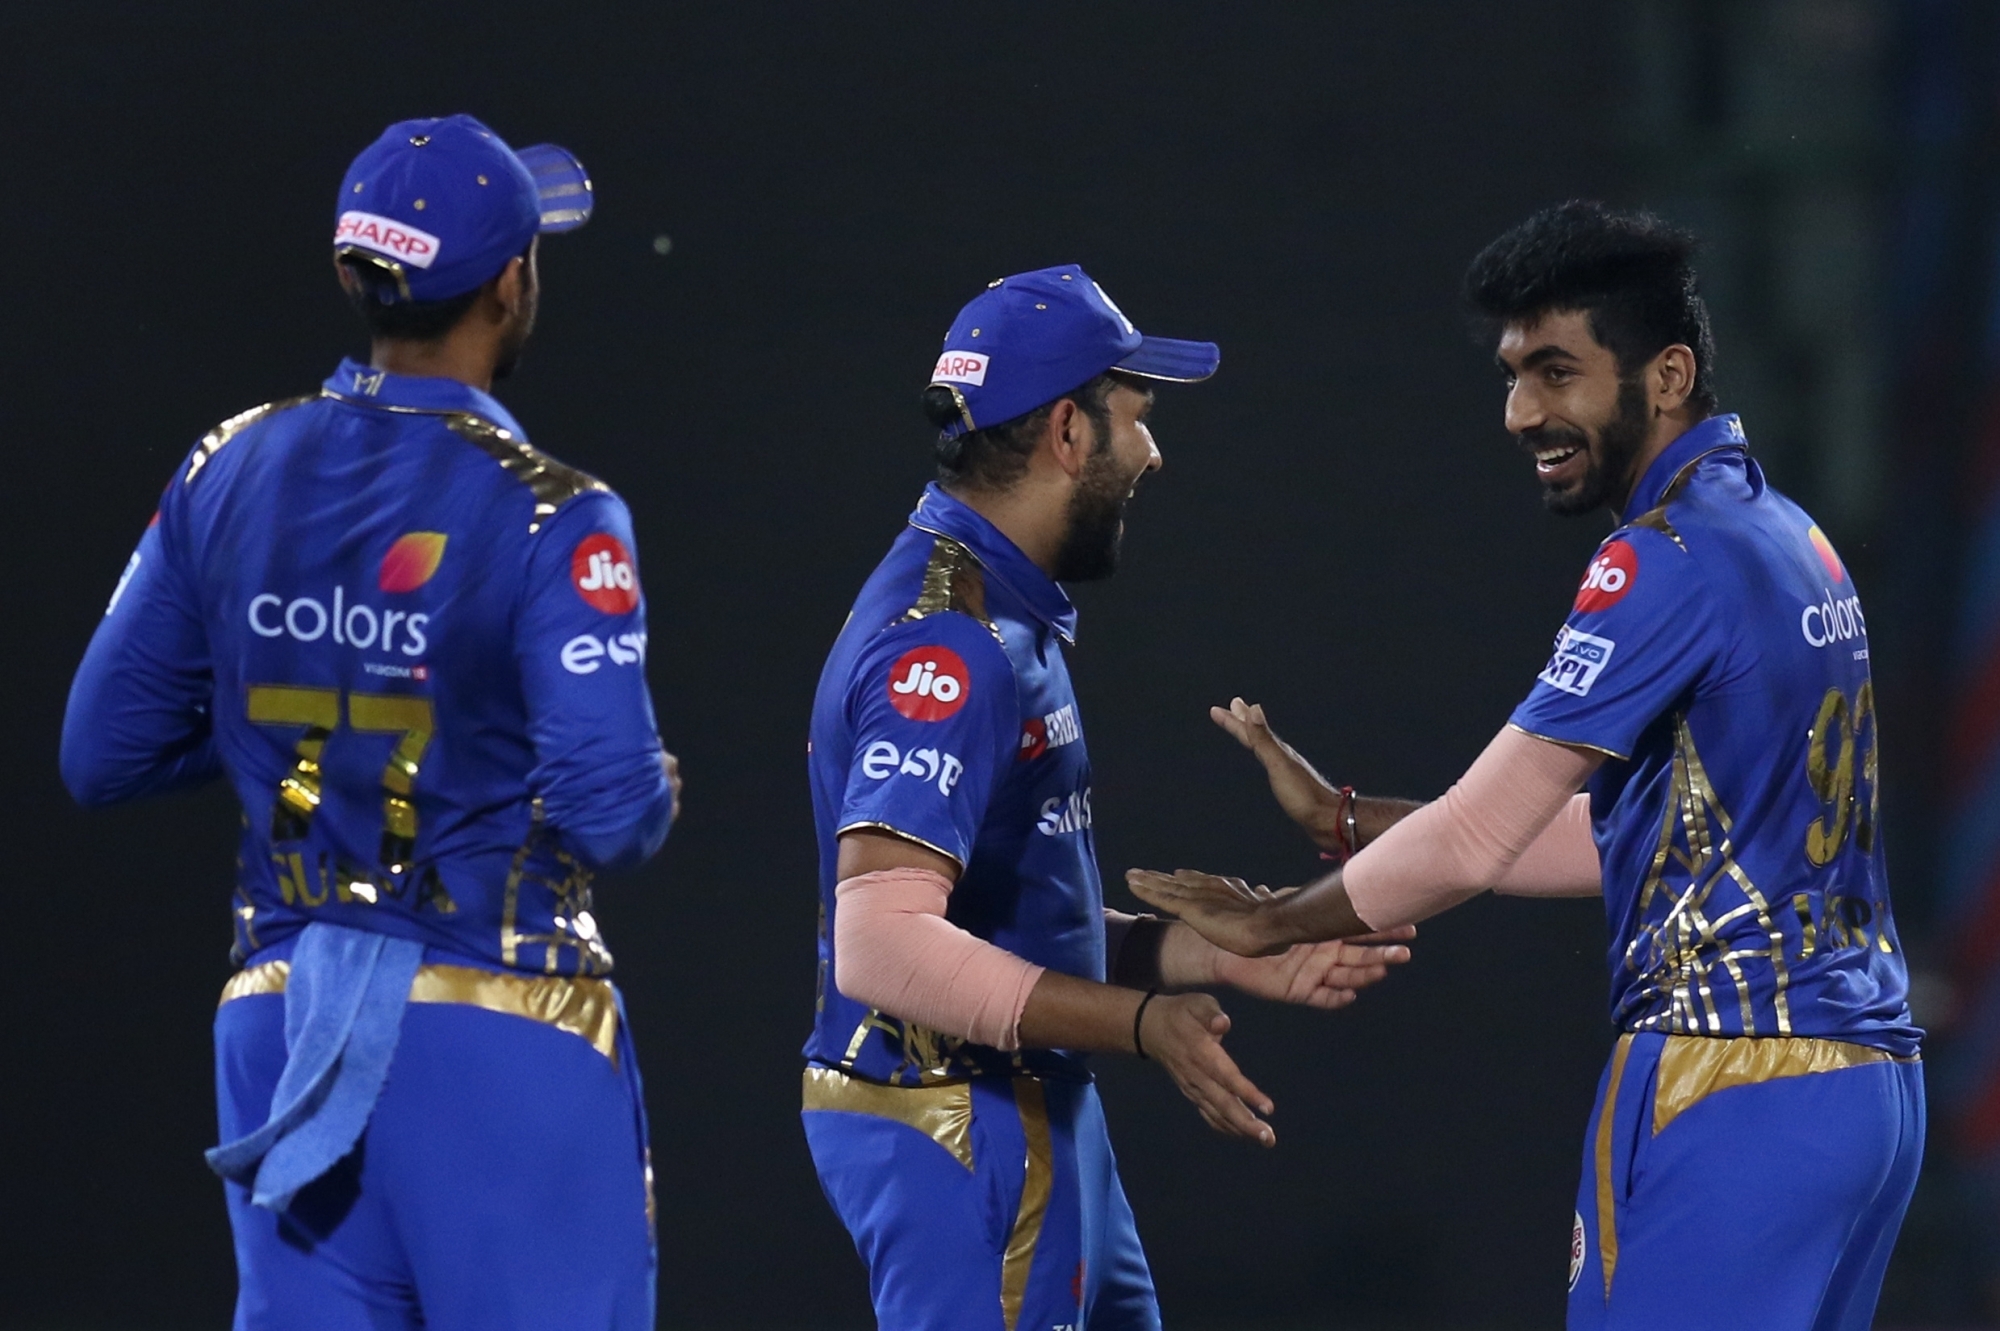 Bumrah has been tremendous for MI under Rohit's leadership | IANS